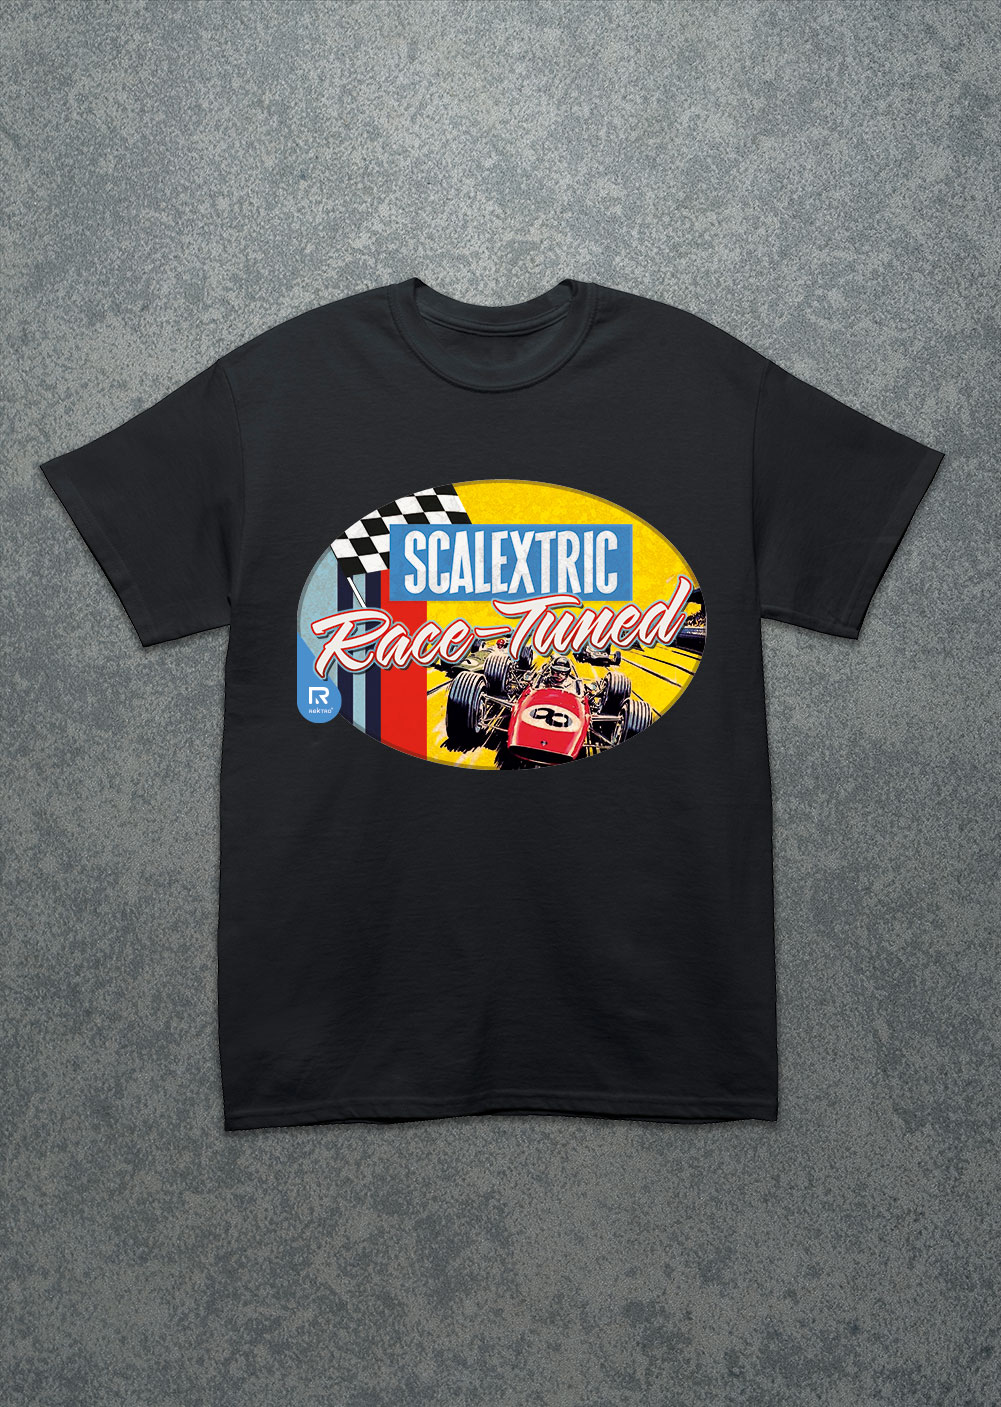 Old_Flames-Scalextric-Race_Tuned-black-tee